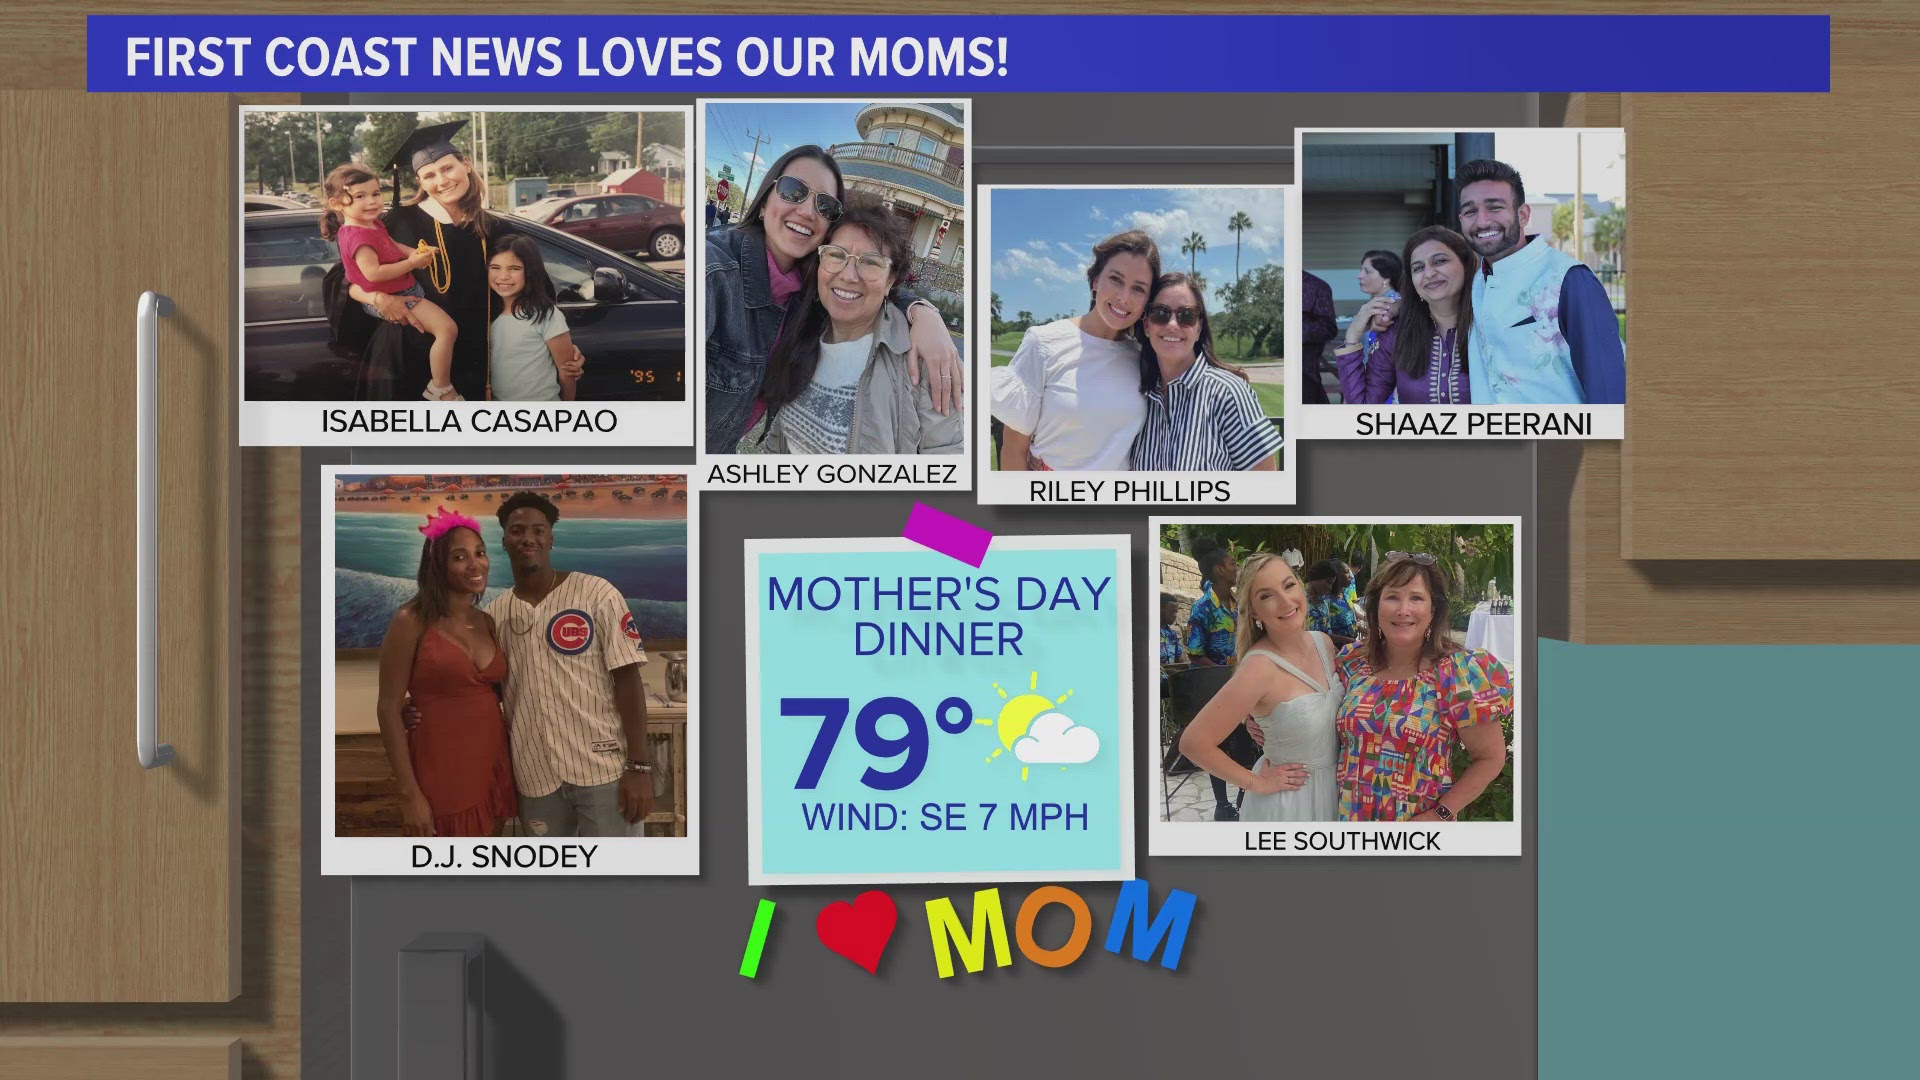 The First Coast News weekend team wanted to wish all our moms a Happy Mother's Day!